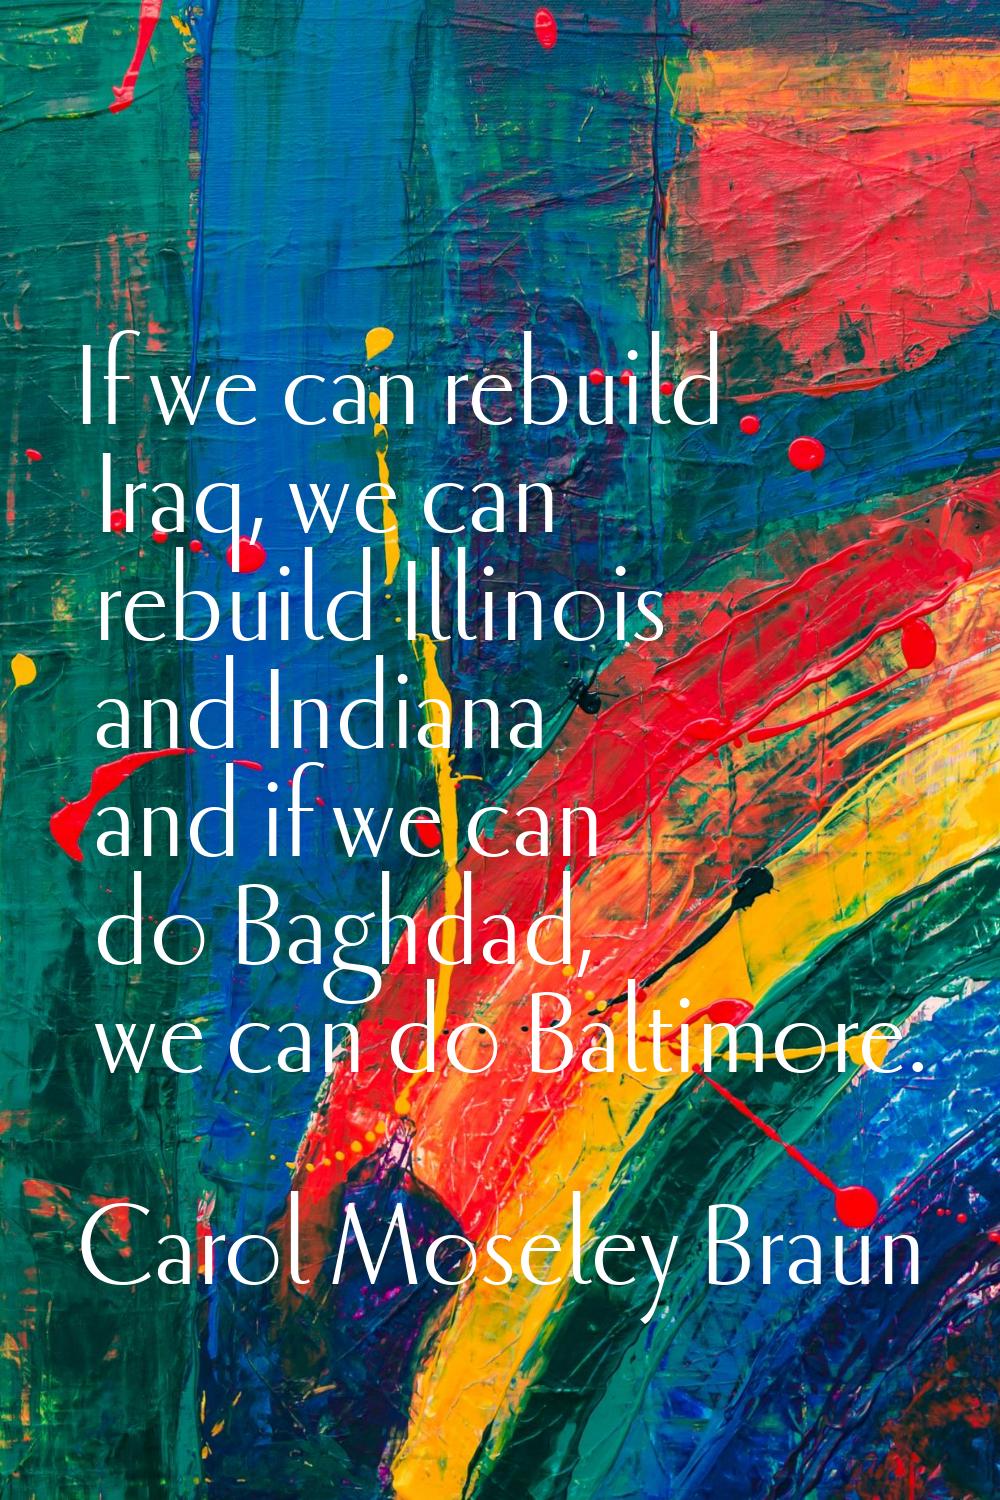 If we can rebuild Iraq, we can rebuild Illinois and Indiana and if we can do Baghdad, we can do Bal